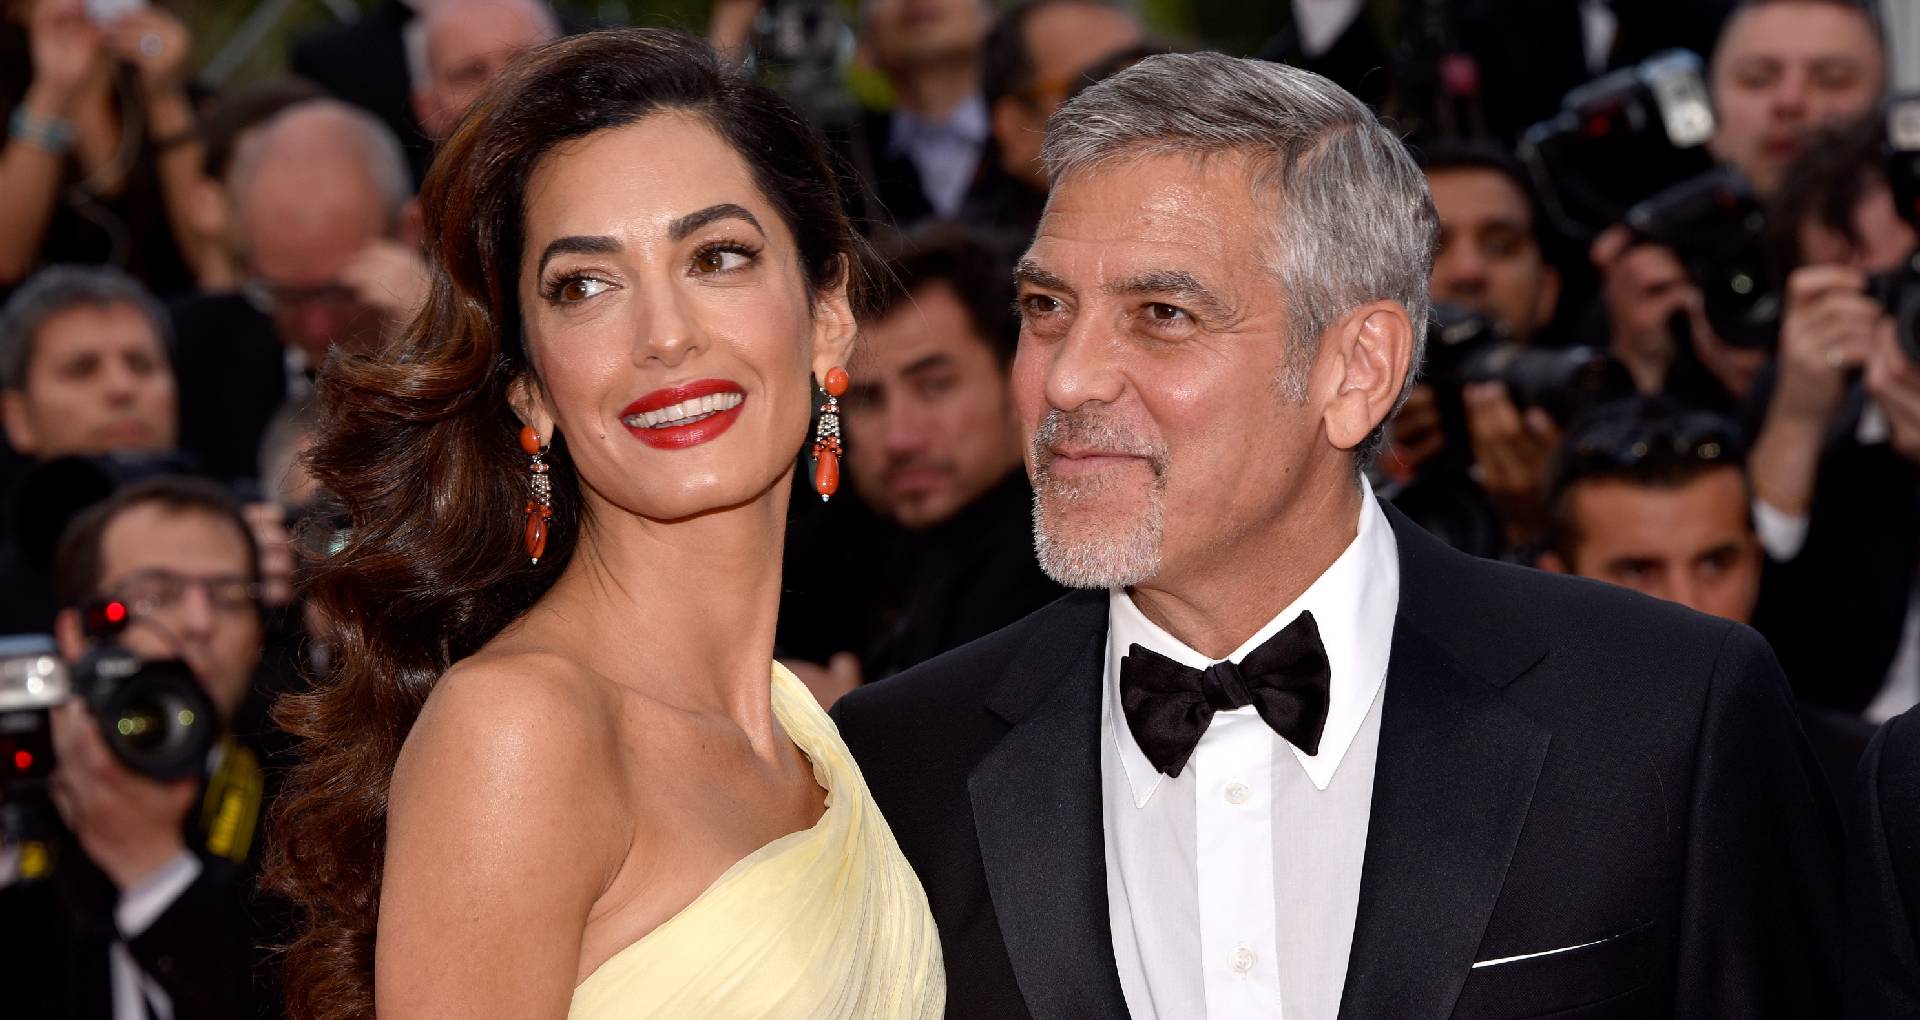 This Is The $58 Lipstick Amal Clooney Wears On The Red Carpet